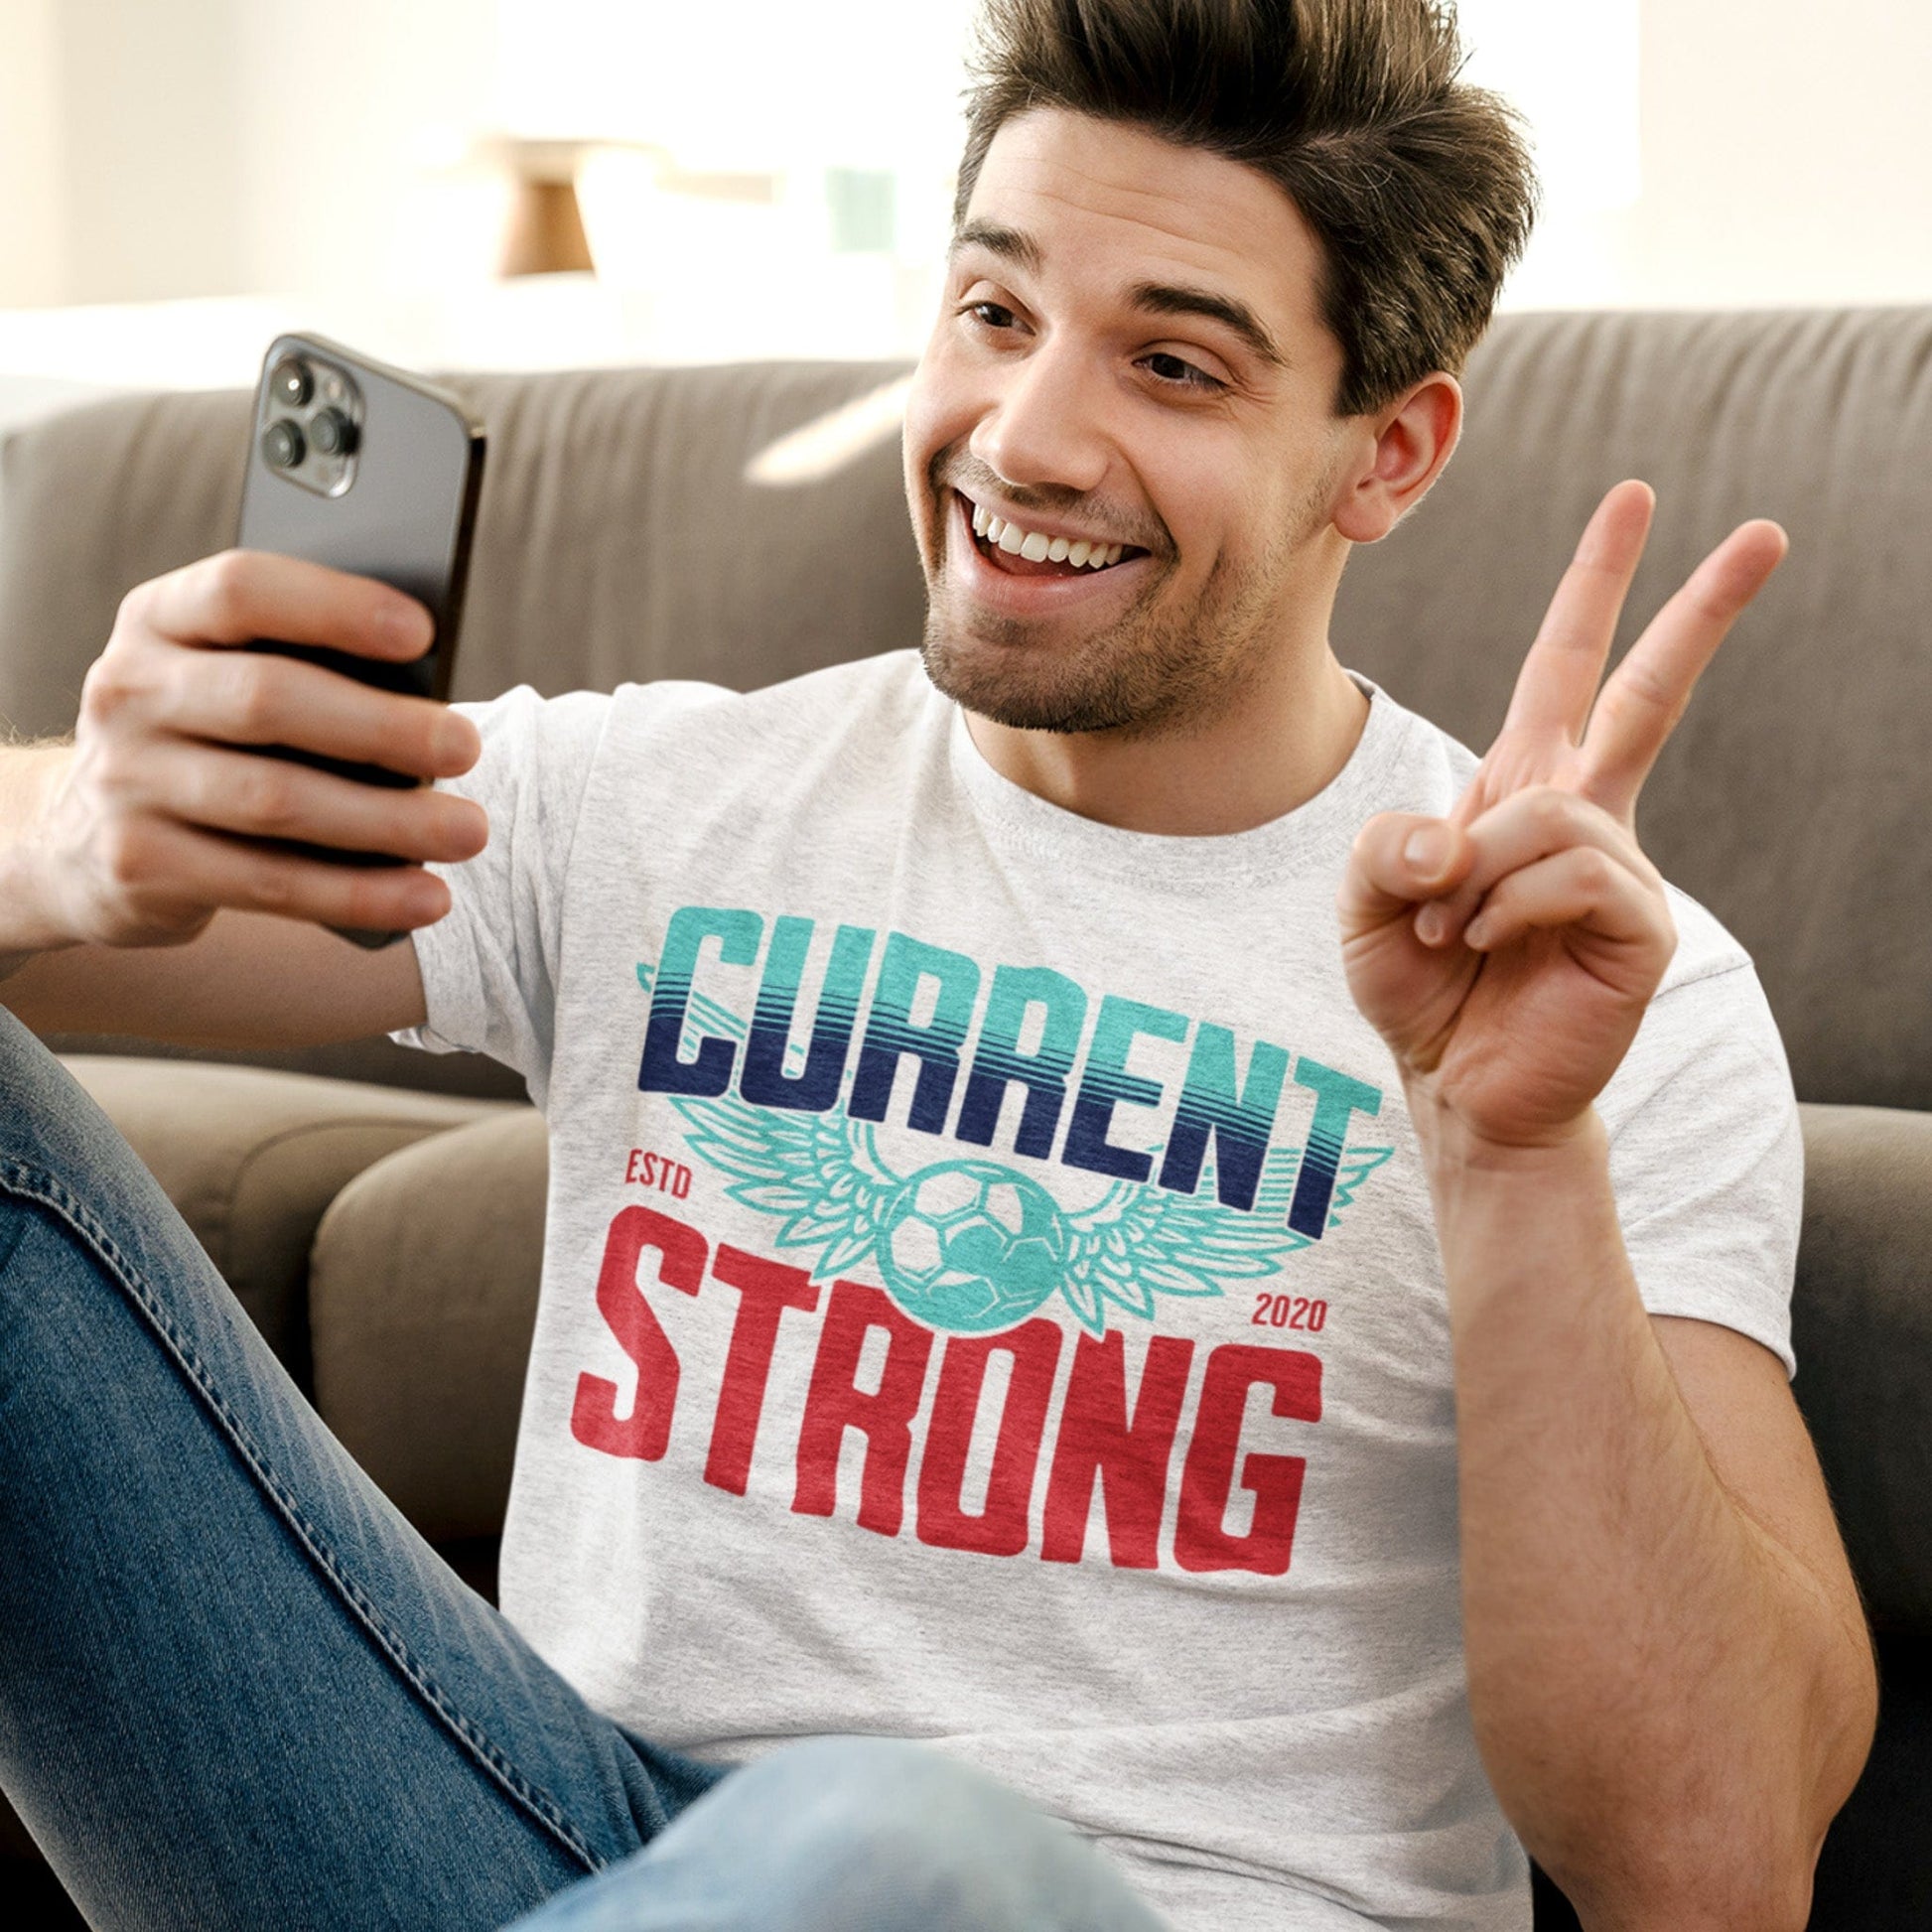 KC Swag Kansas City Current CURRENT STRONG on heather Ash unisex t-shirt worn by male model seated in front of a couch flashing a smile and the peace sign to his mobile phone